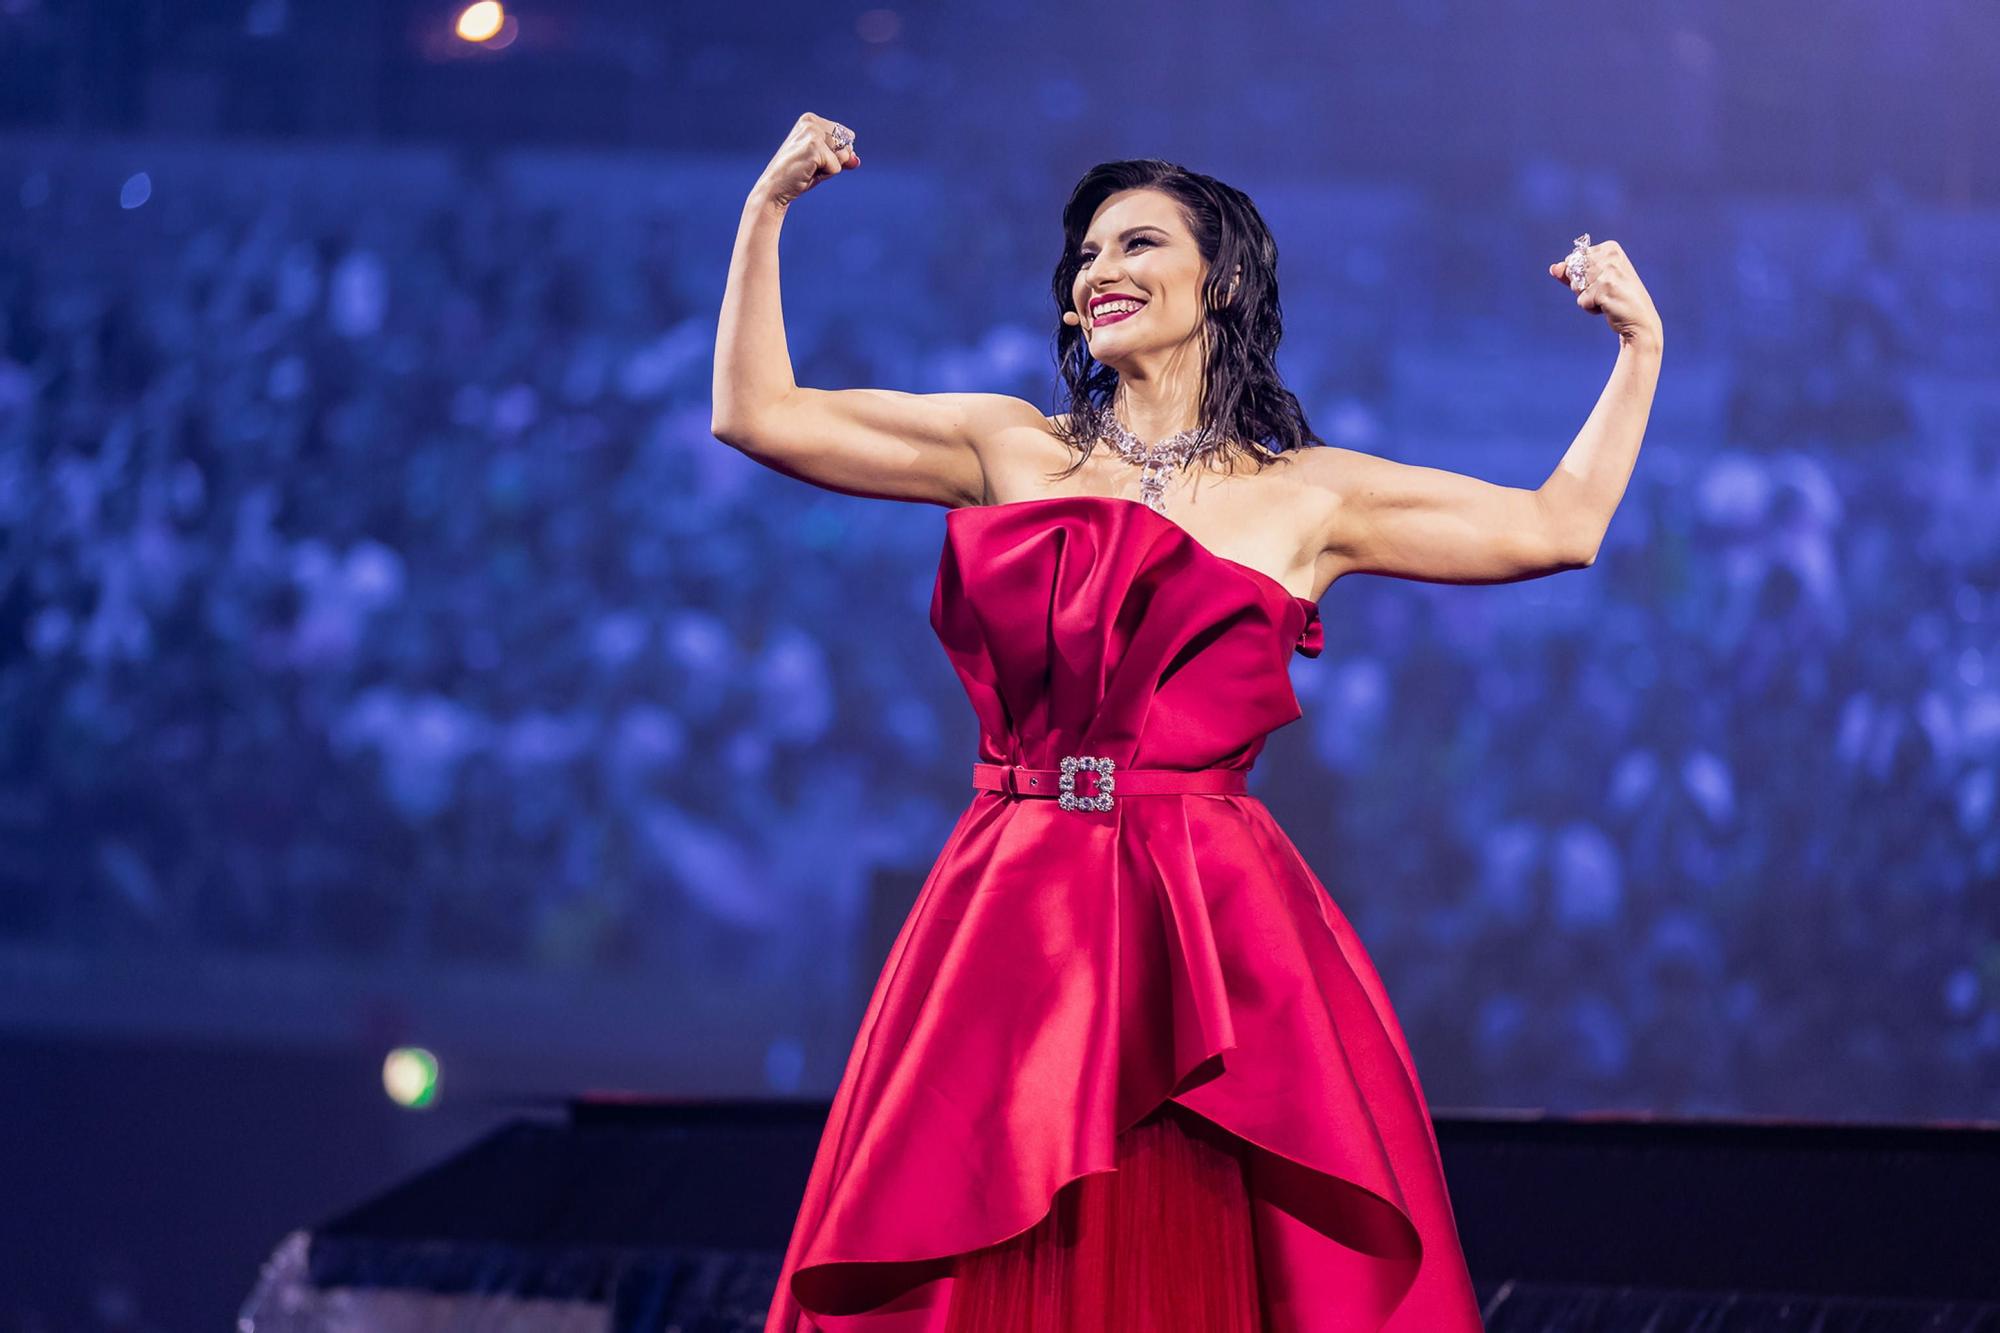 Second Semi-Final - 66th Eurovision Song Contest in Turin